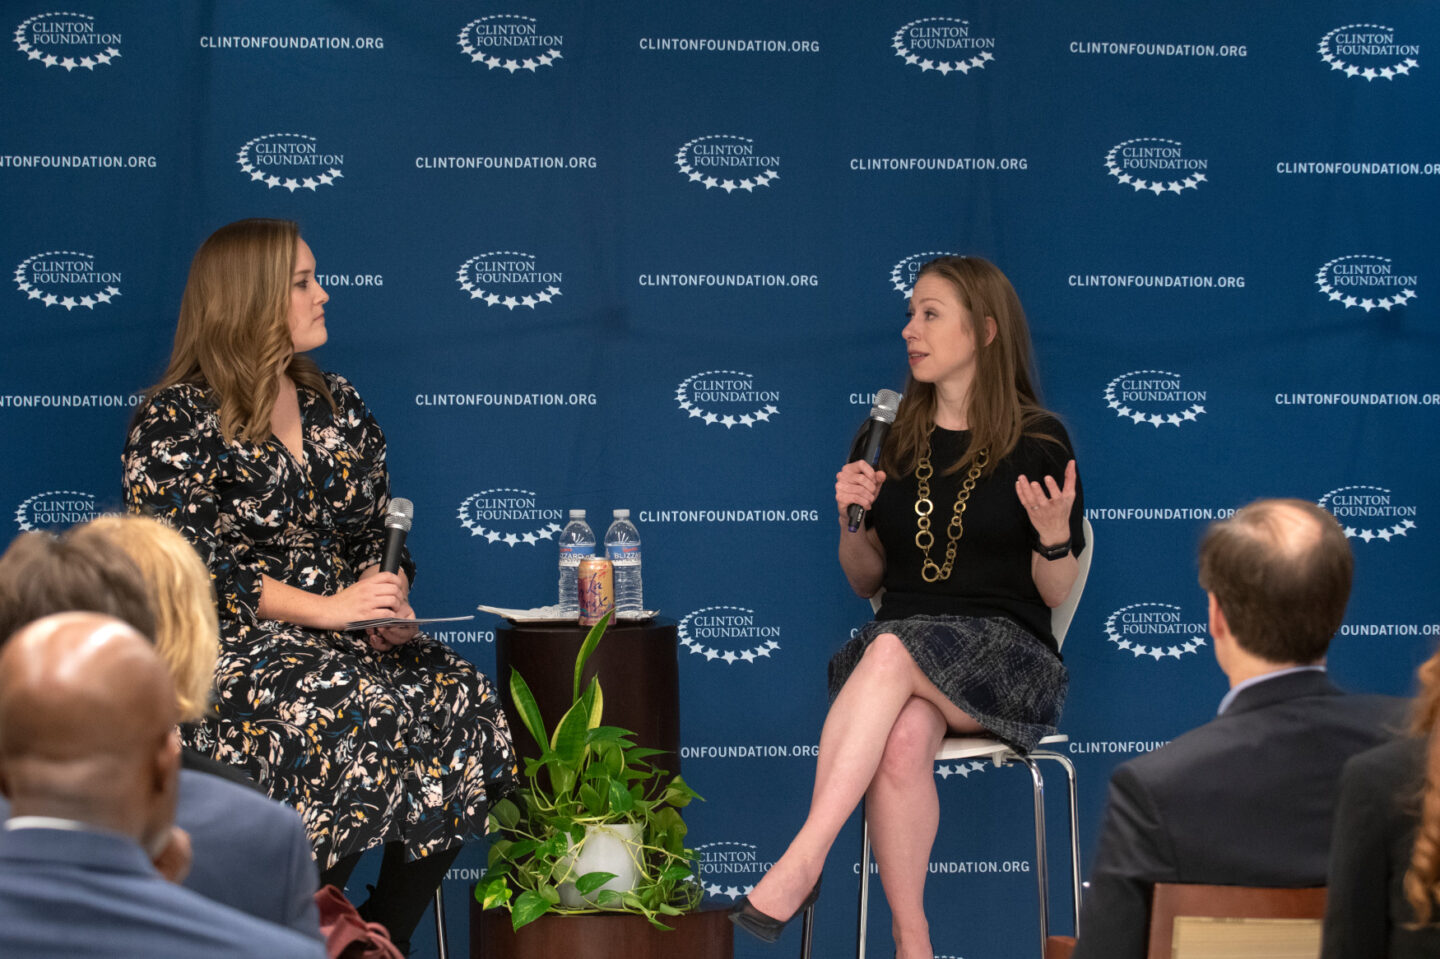 Chelsea Clinton and a staff member speak in front of a group